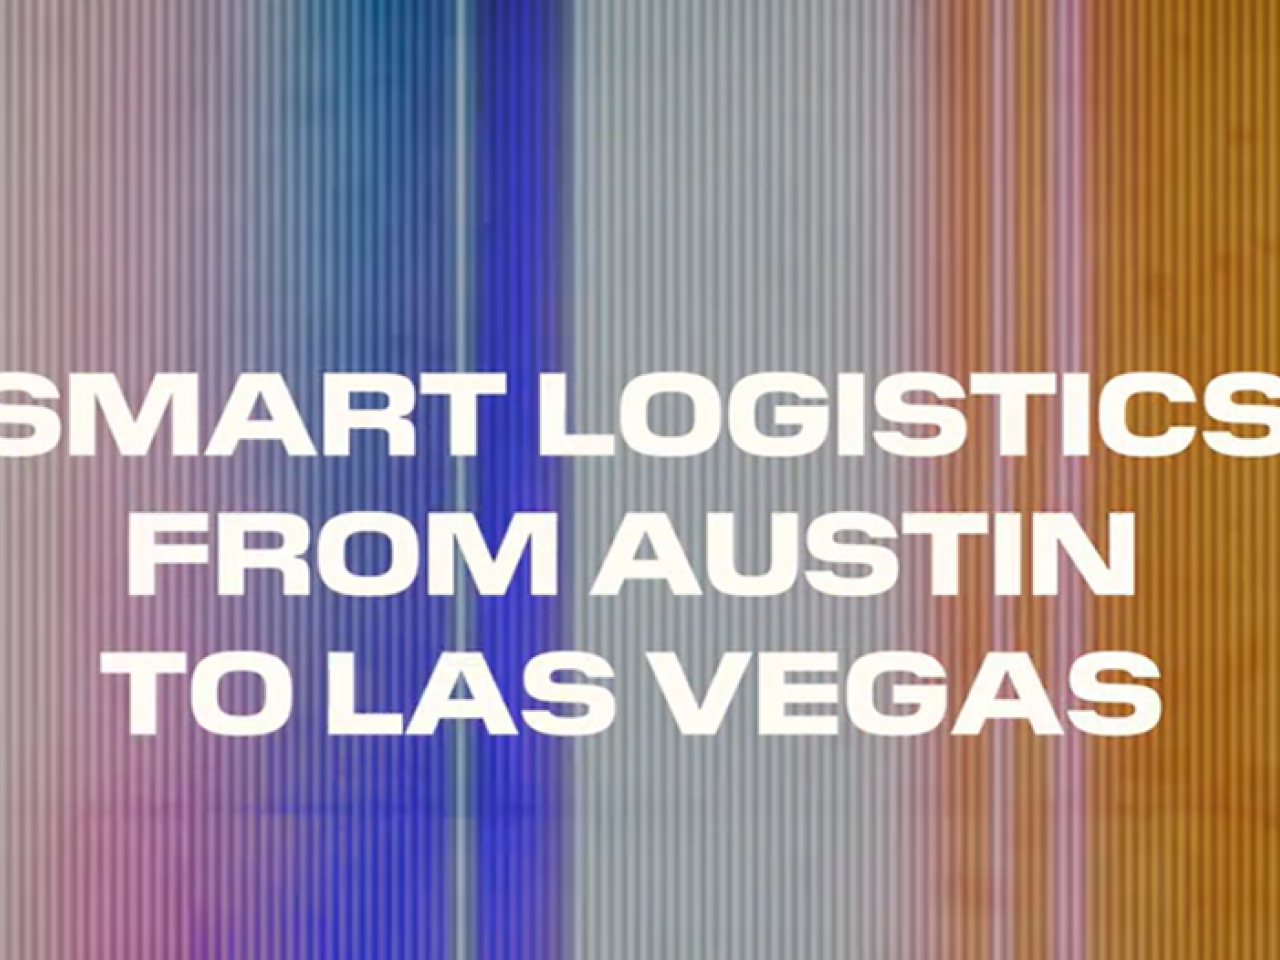 Text stating "Smart logistics from Austin to Las Vegas"